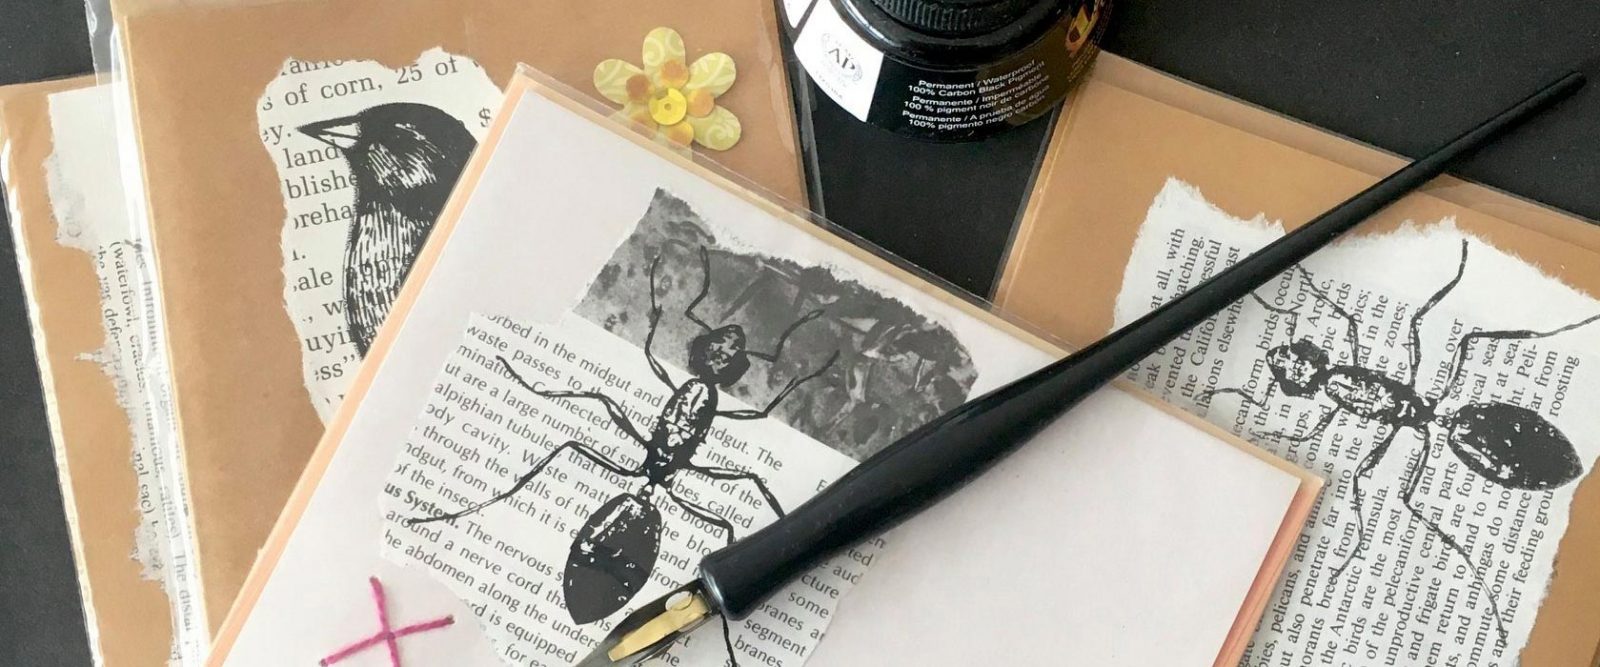 Handcrafted and drawn cards with fountain pen and ink bottle.